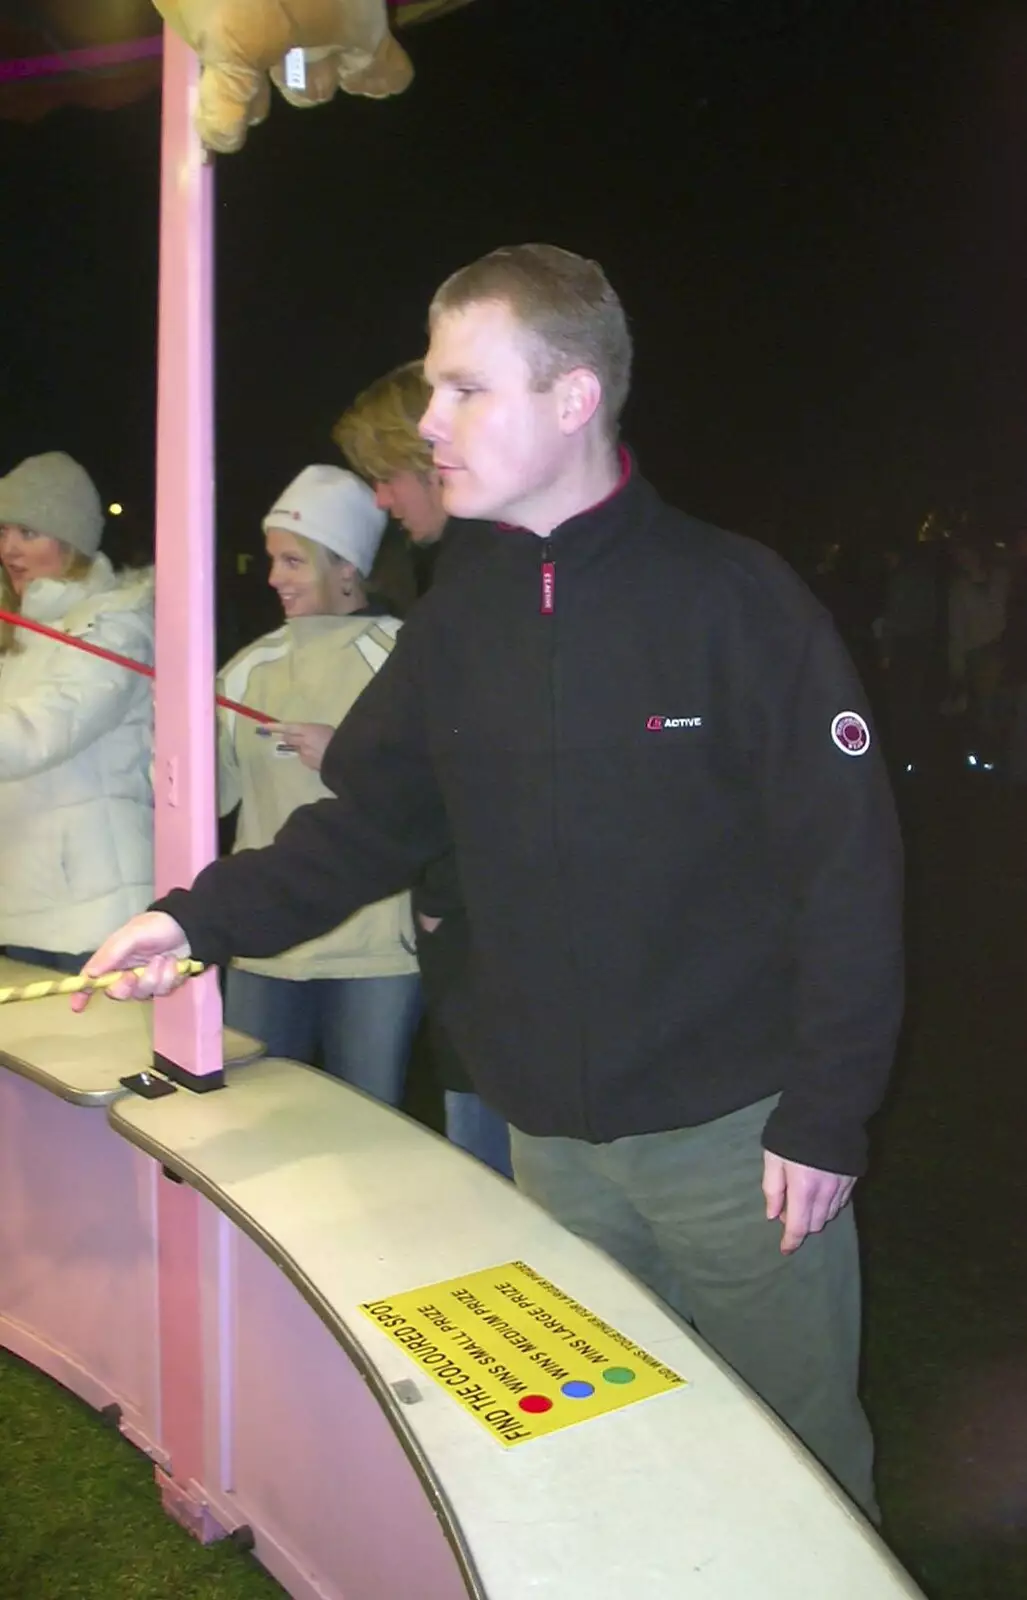 Mikey P goes fishing, from Fireworks and Fairgrounds with Mikey P, Fair Green, Diss, Norfolk - 5th November 2003